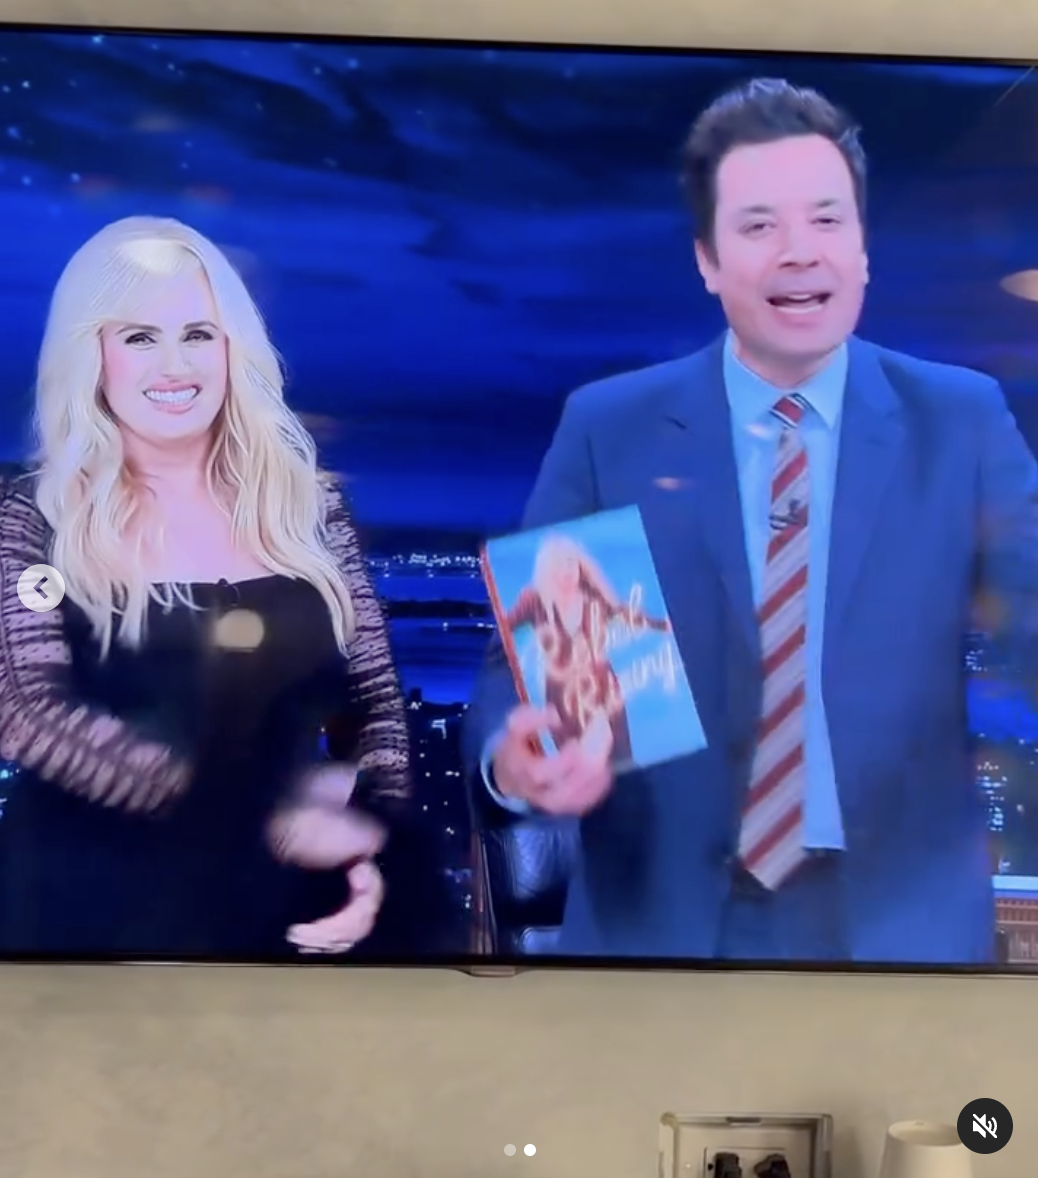 Rebel Wilson and Jimmy Fallon on television, dated April 2024 | Source: Instagram/rebelwilson